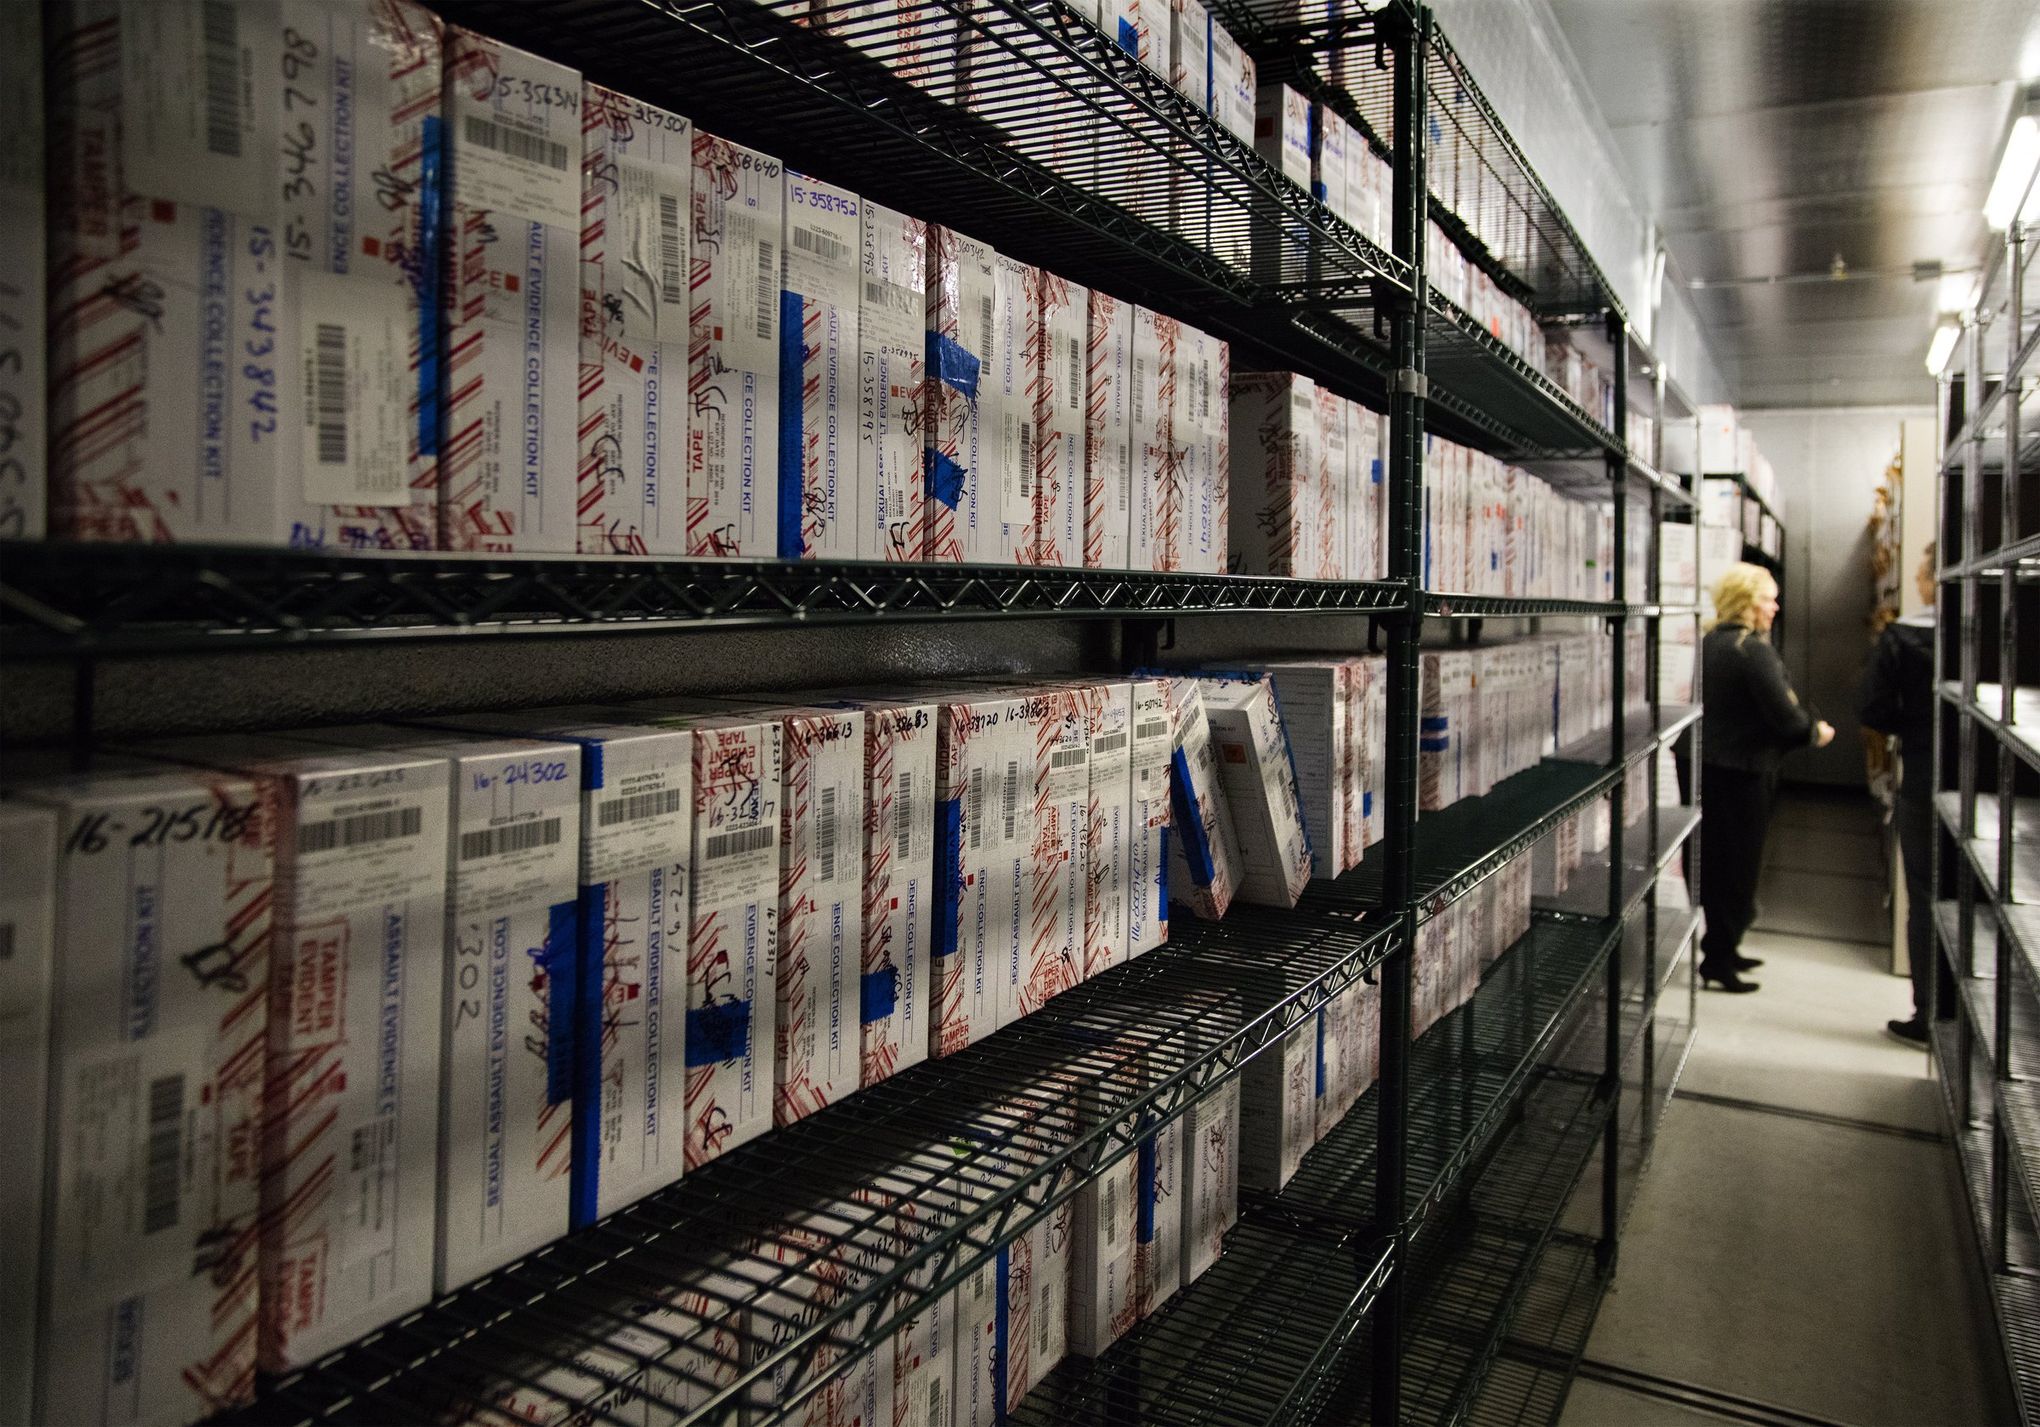 Hundreds of untested rape kits fill a freezer isle in the Seattle Police Departments evidence room